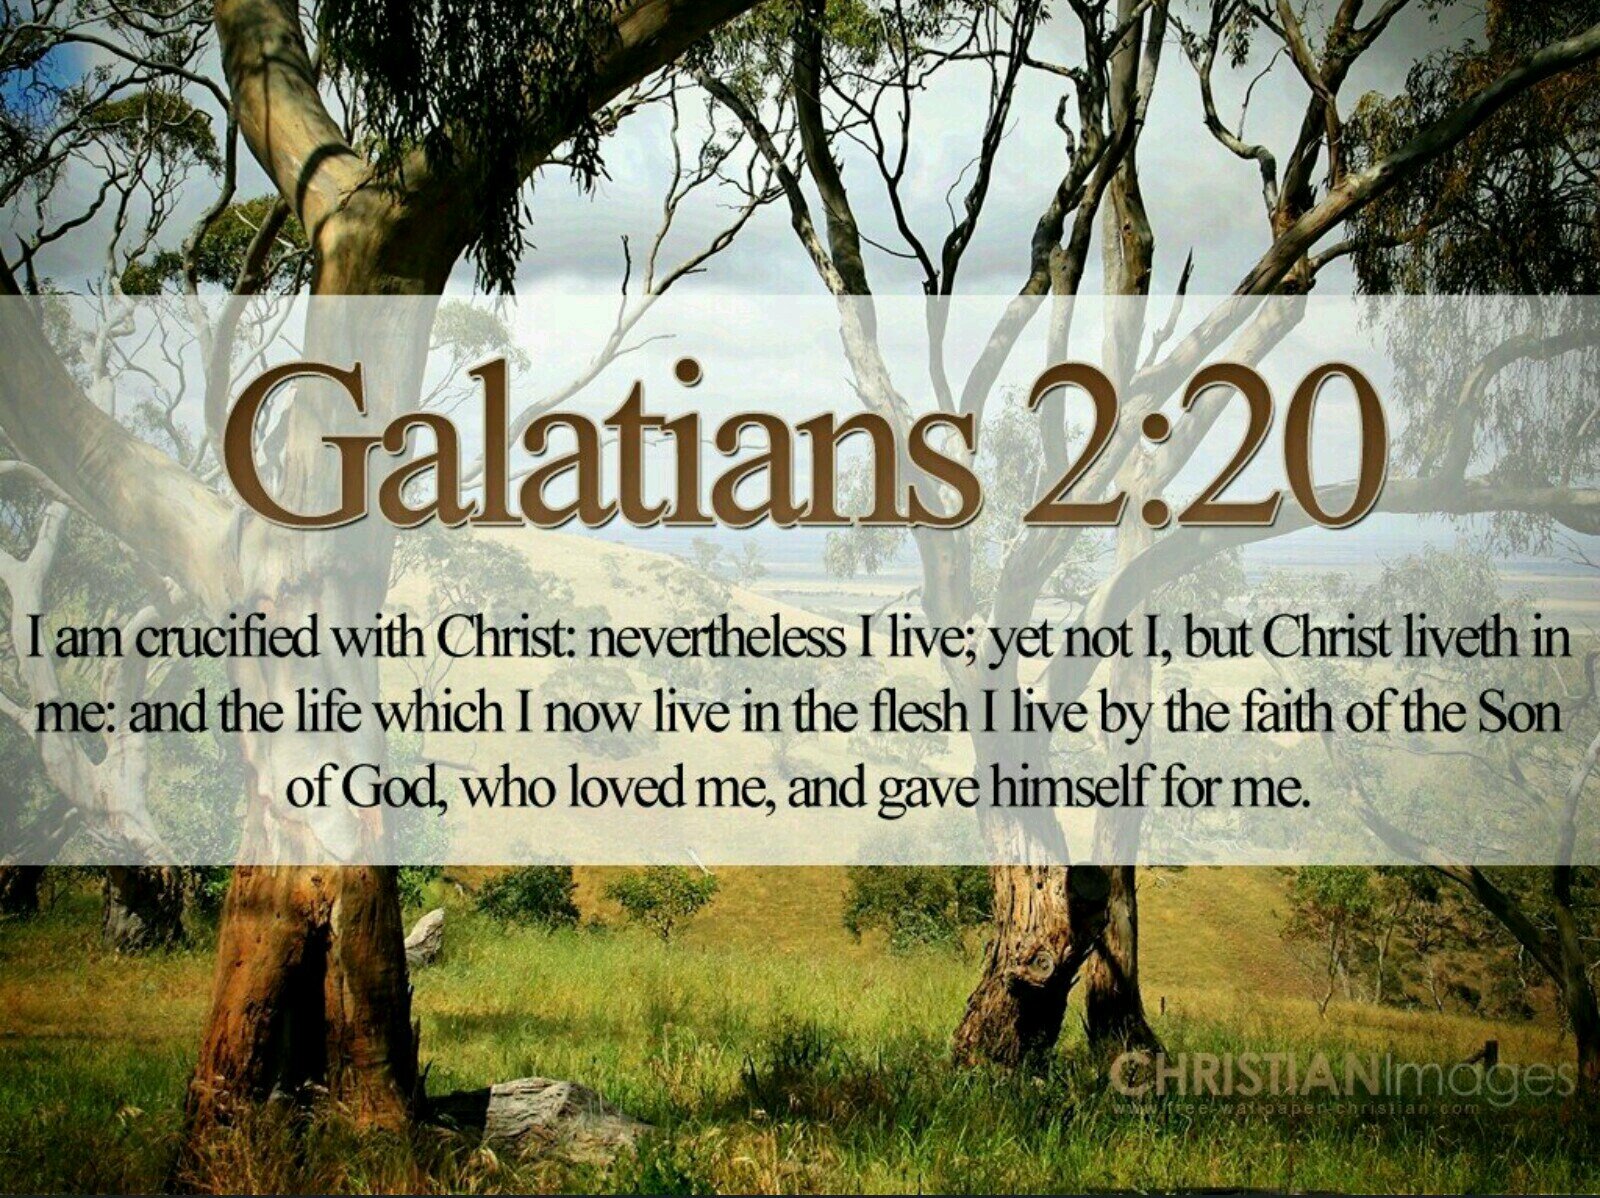 This is an account for people that are a new creation through Jesus Christ and are fully devoted to following Him. Galatians 2:20 & 2 Corinthians 5:17